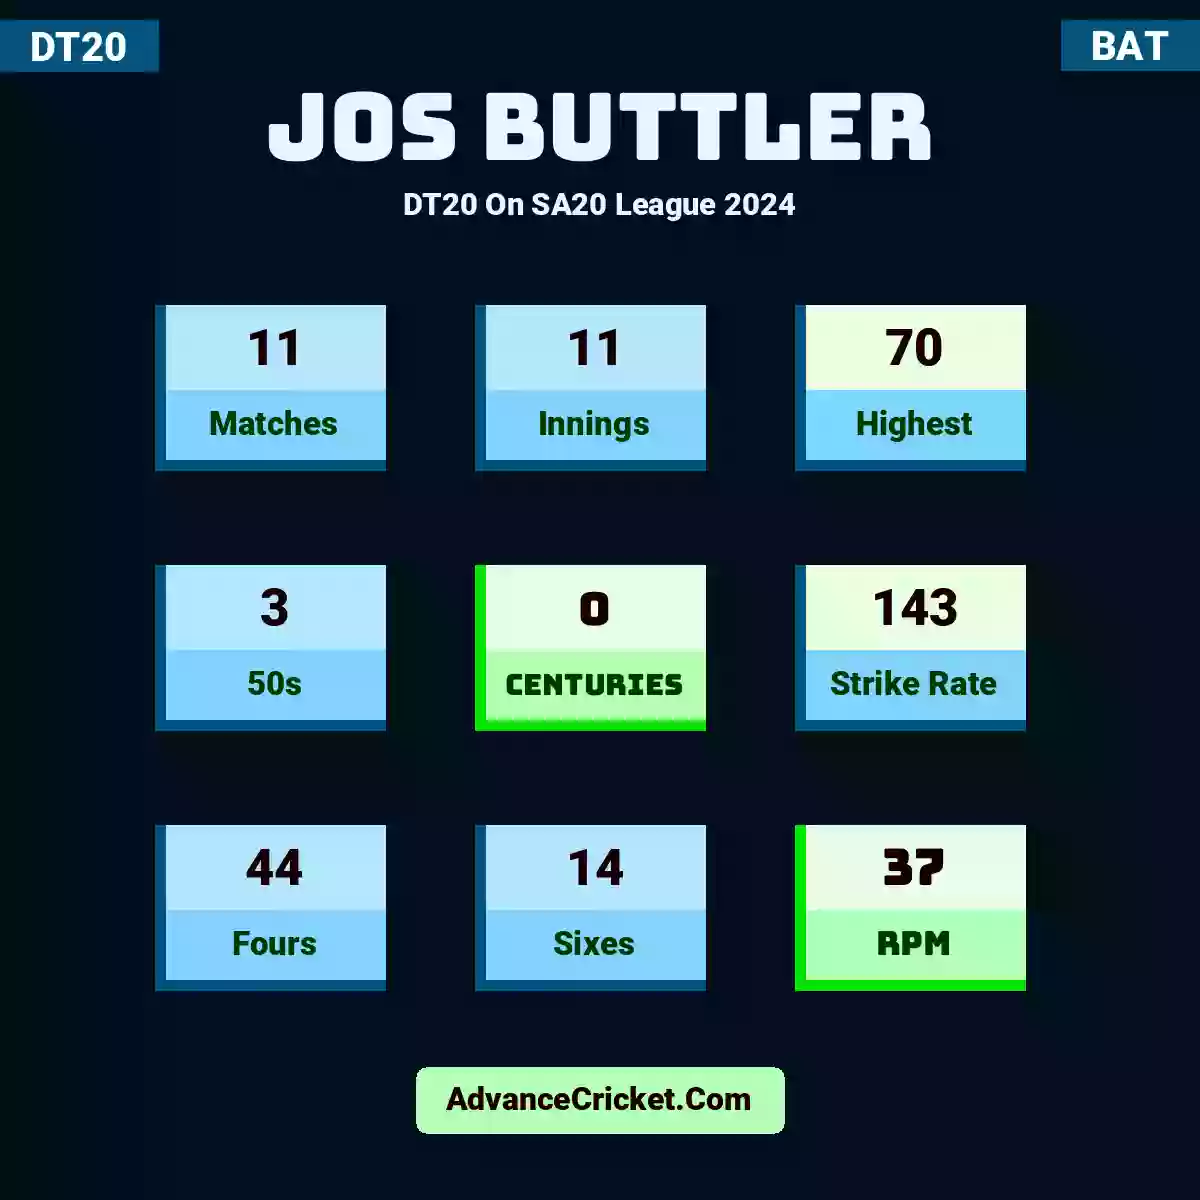 Jos Buttler DT20  On SA20 League 2024, Jos Buttler played 11 matches, scored 70 runs as highest, 3 half-centuries, and 0 centuries, with a strike rate of 143. J.Buttler hit 44 fours and 14 sixes, with an RPM of 37.